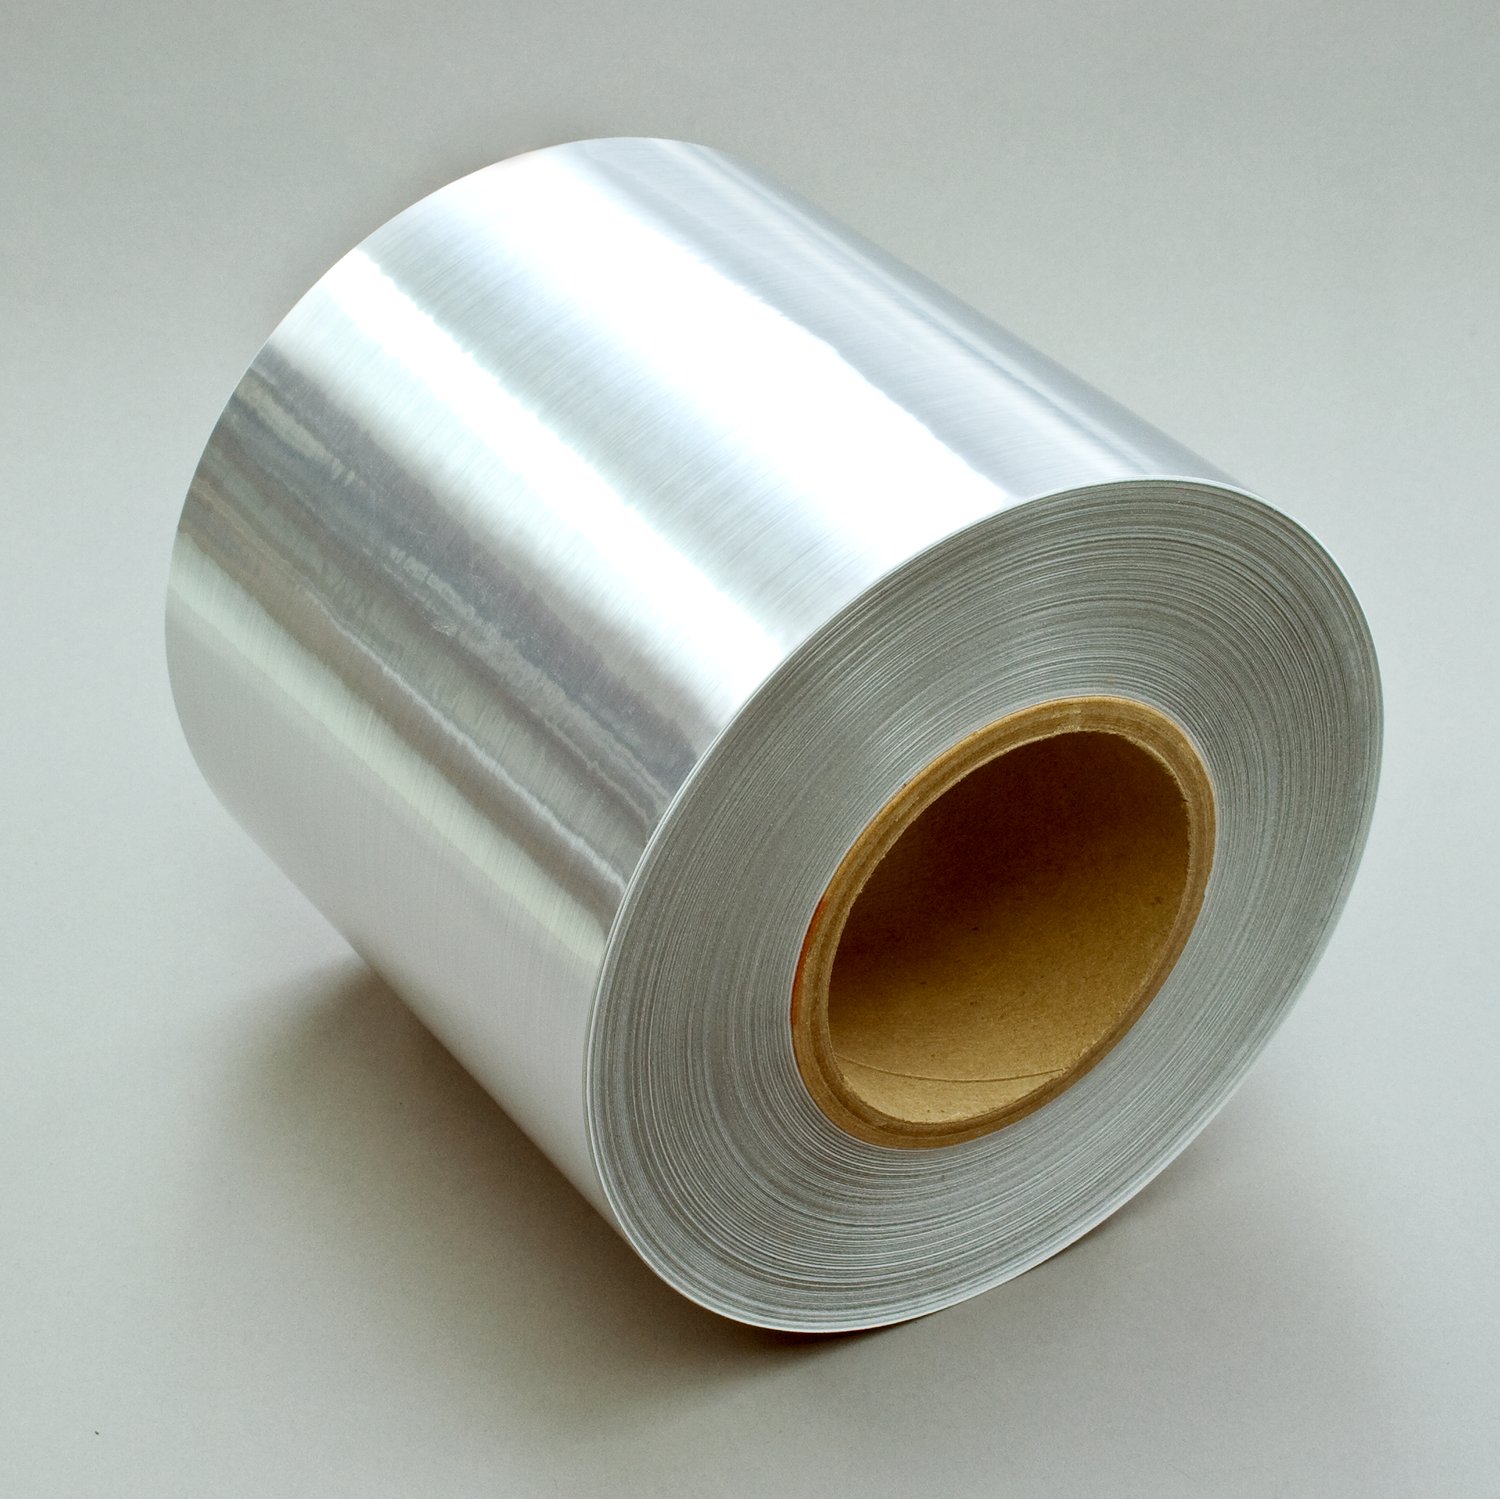 7000029159 - 3M Sheet and Screen Label Material 7909S, Brushed Silver Polyester, 508 mm x 686 mm, 100 Sheet/Case